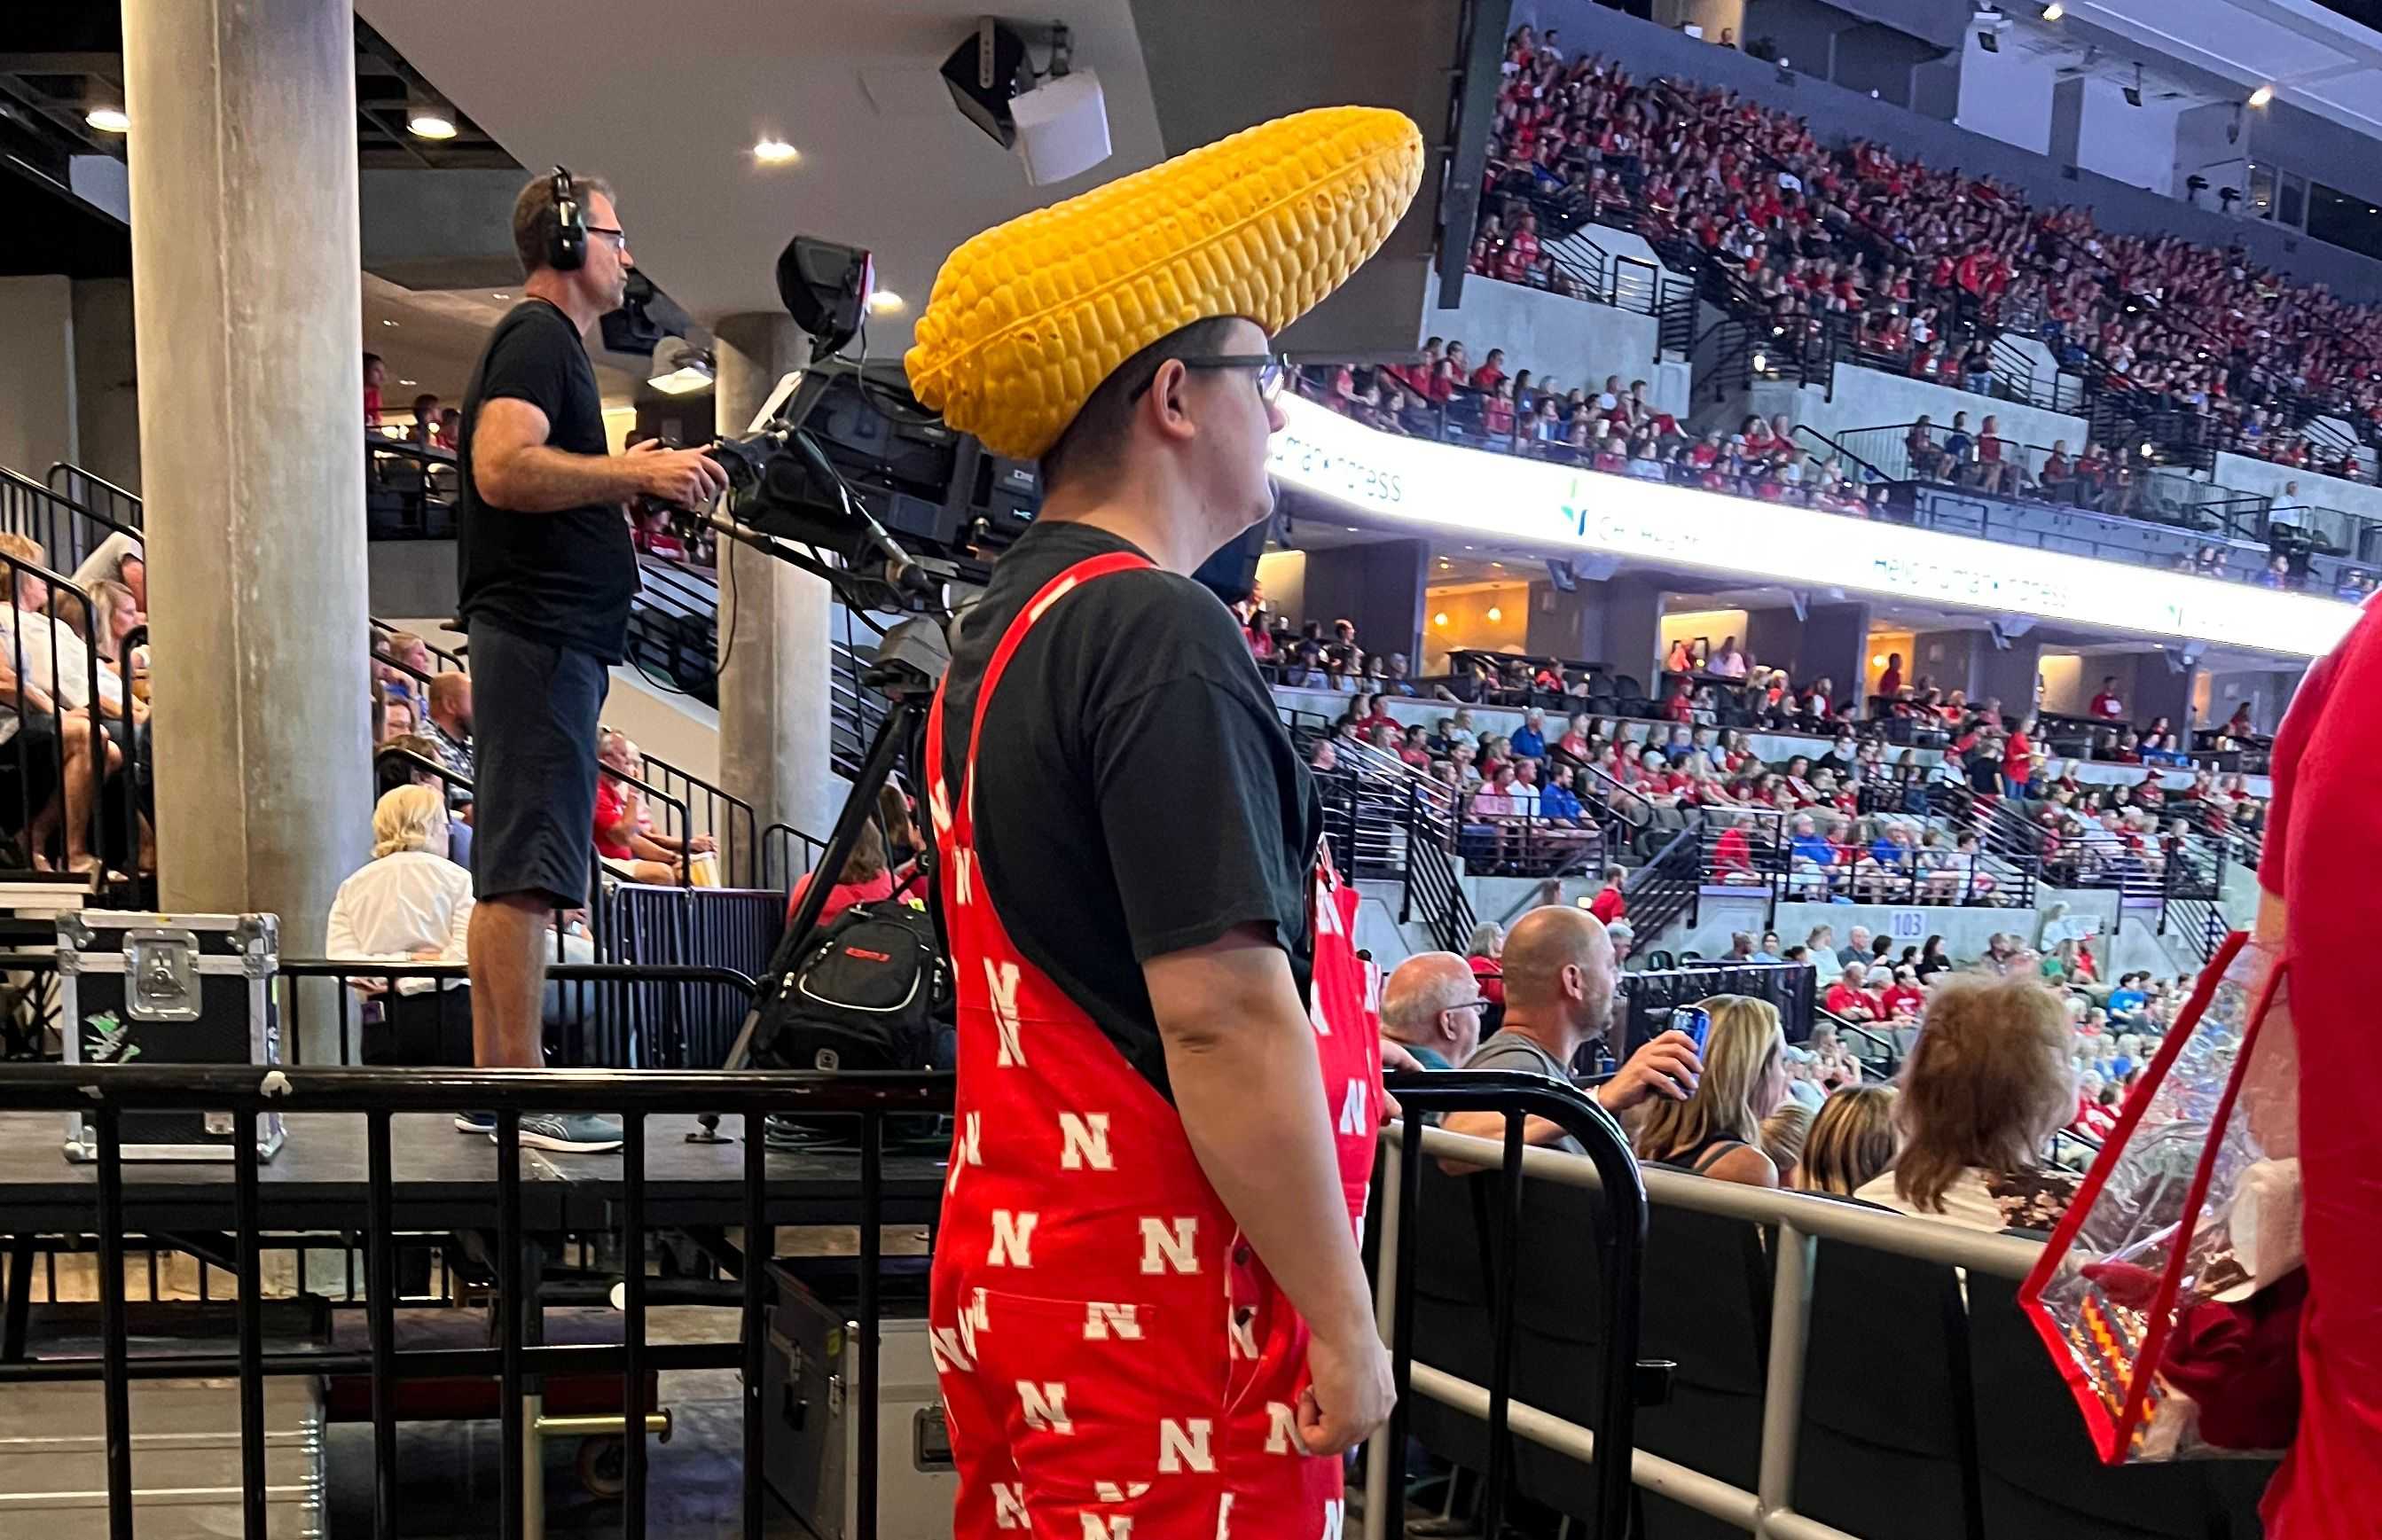 A dedicated Husker fan looked on as the Creighton University Bluejays pushed the University of Nebraska Cornhuskers into a fifth set during a women's volleyball match at CHI Health Arena in Omaha on Sept. 6.